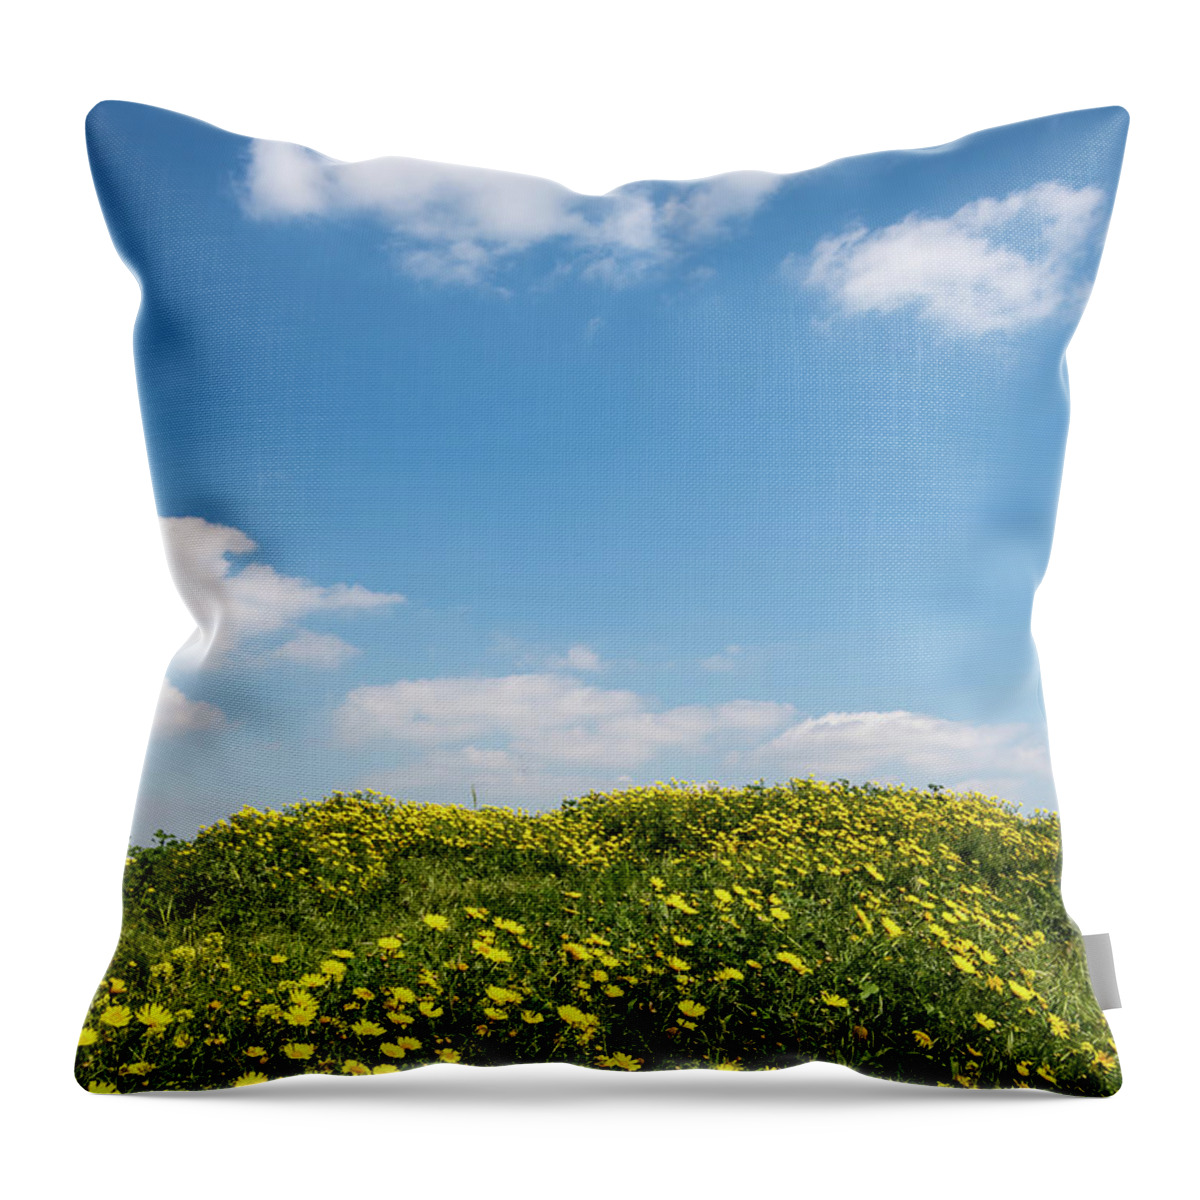 Flowers Throw Pillow featuring the photograph Field with yellow marguerite daisy blooming flowers against and blue cloudy sky. Spring landscape nature background by Michalakis Ppalis